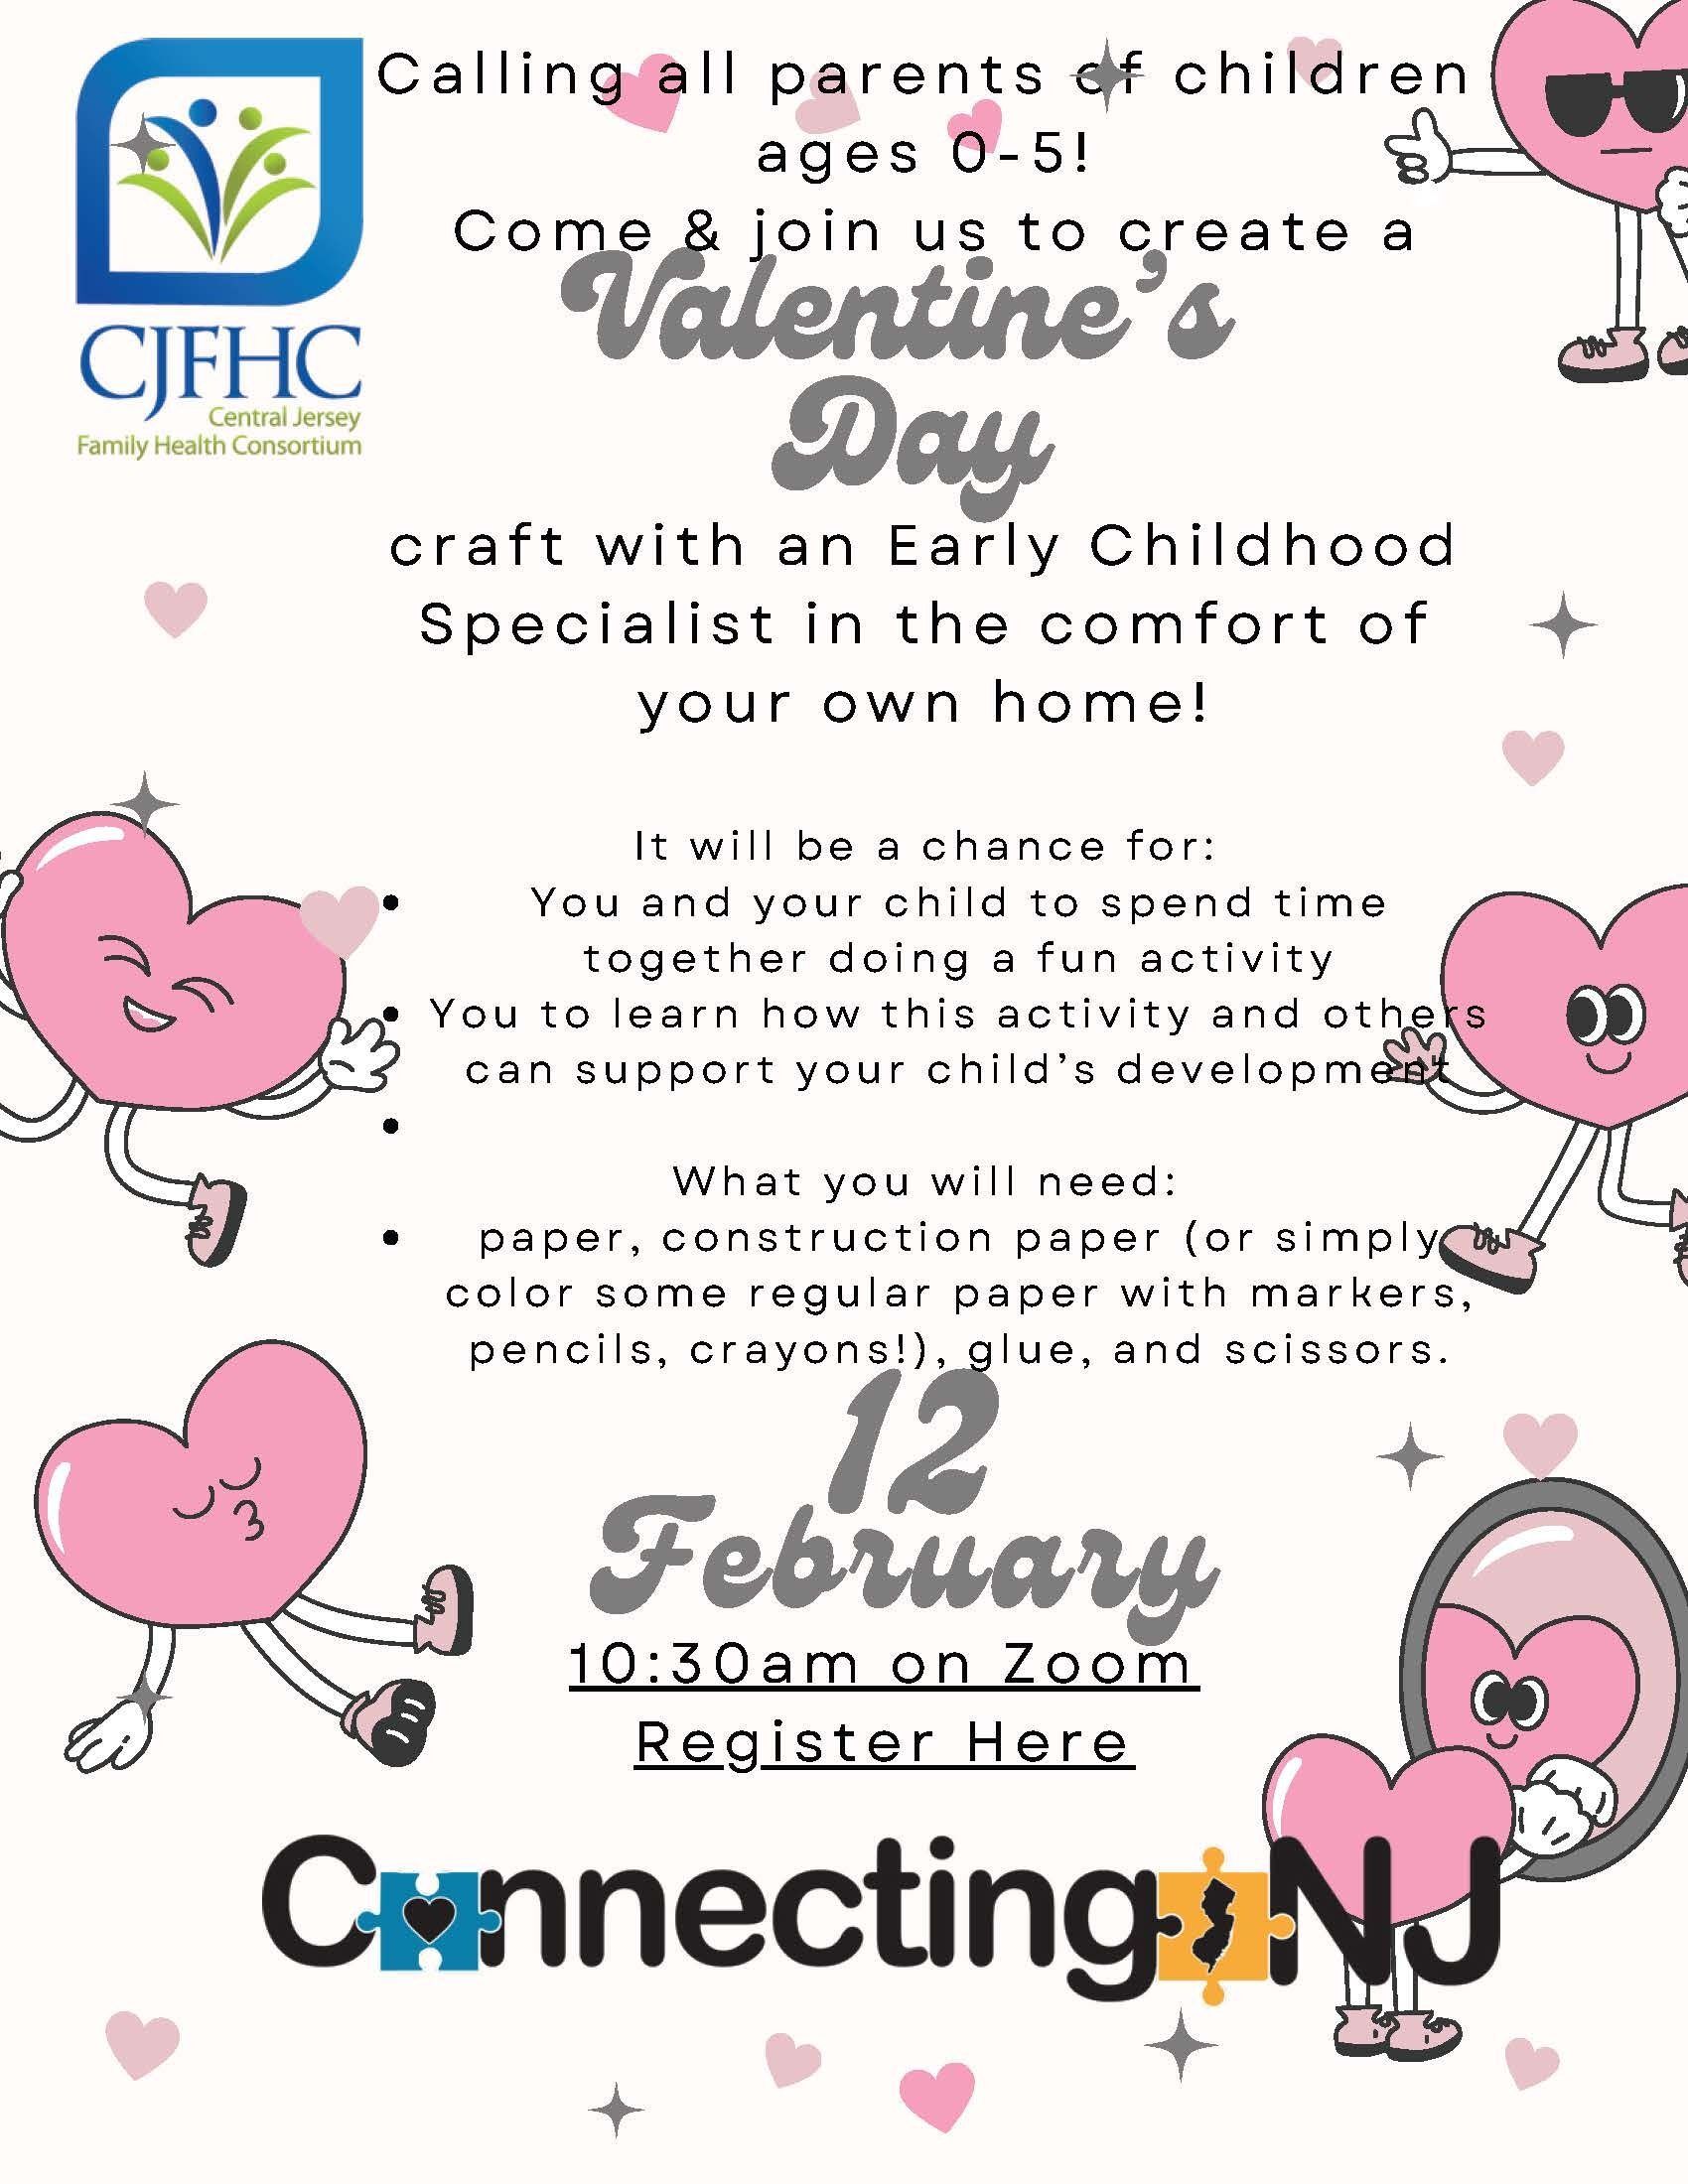 Crafting Connections with Connecting NJ this Valentine's Day!